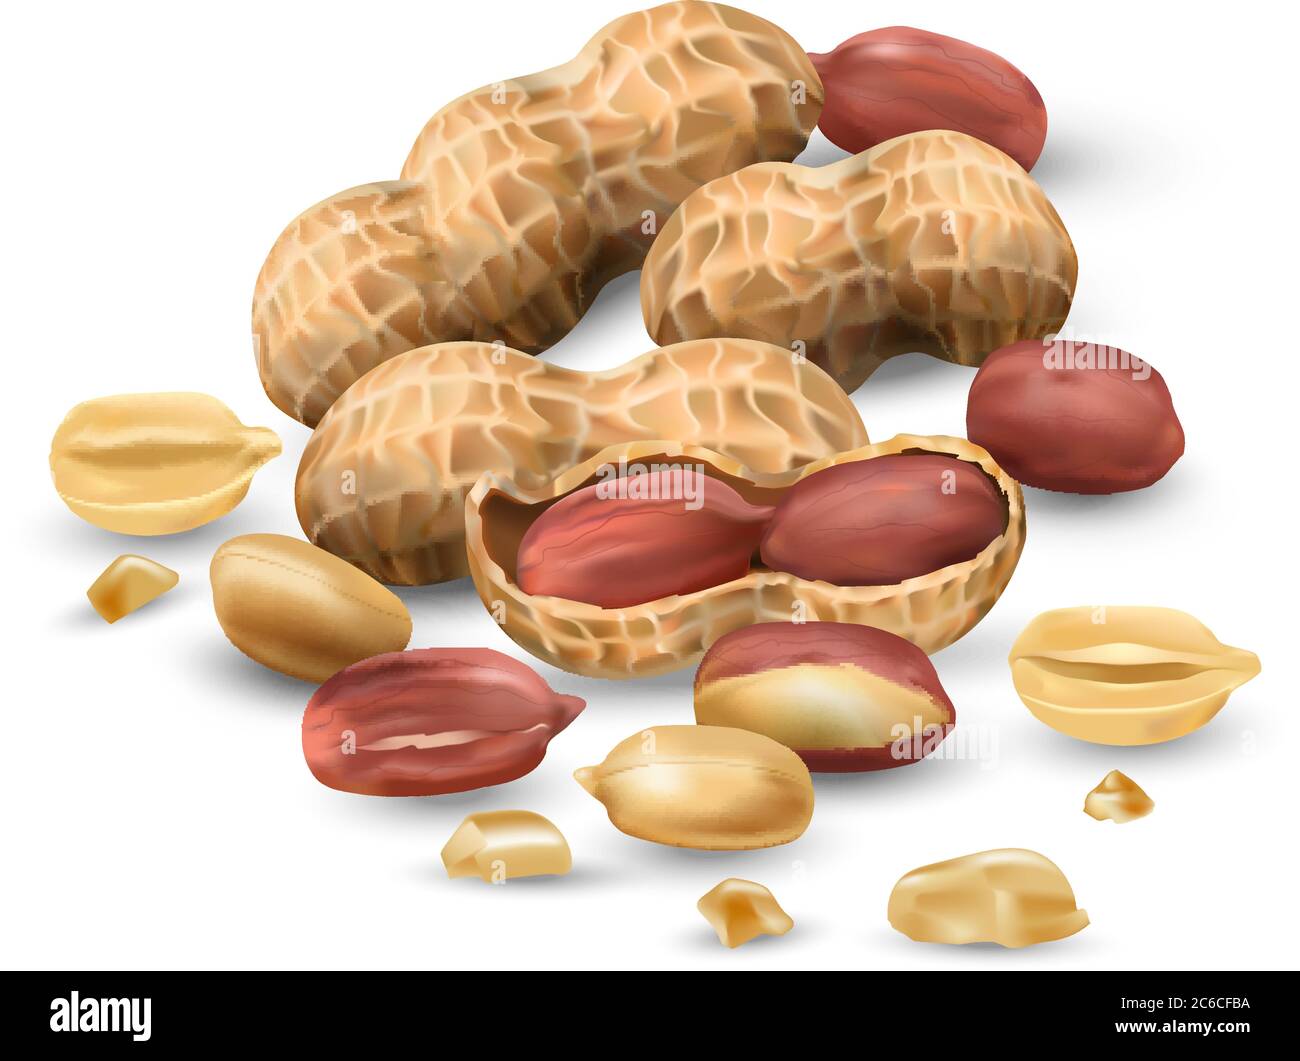 Peanuts in vector 3D illustration realistic. For packaging with peanut butter, nut mix. Vegetable protein for vegetarians, a useful product. Stock Vector